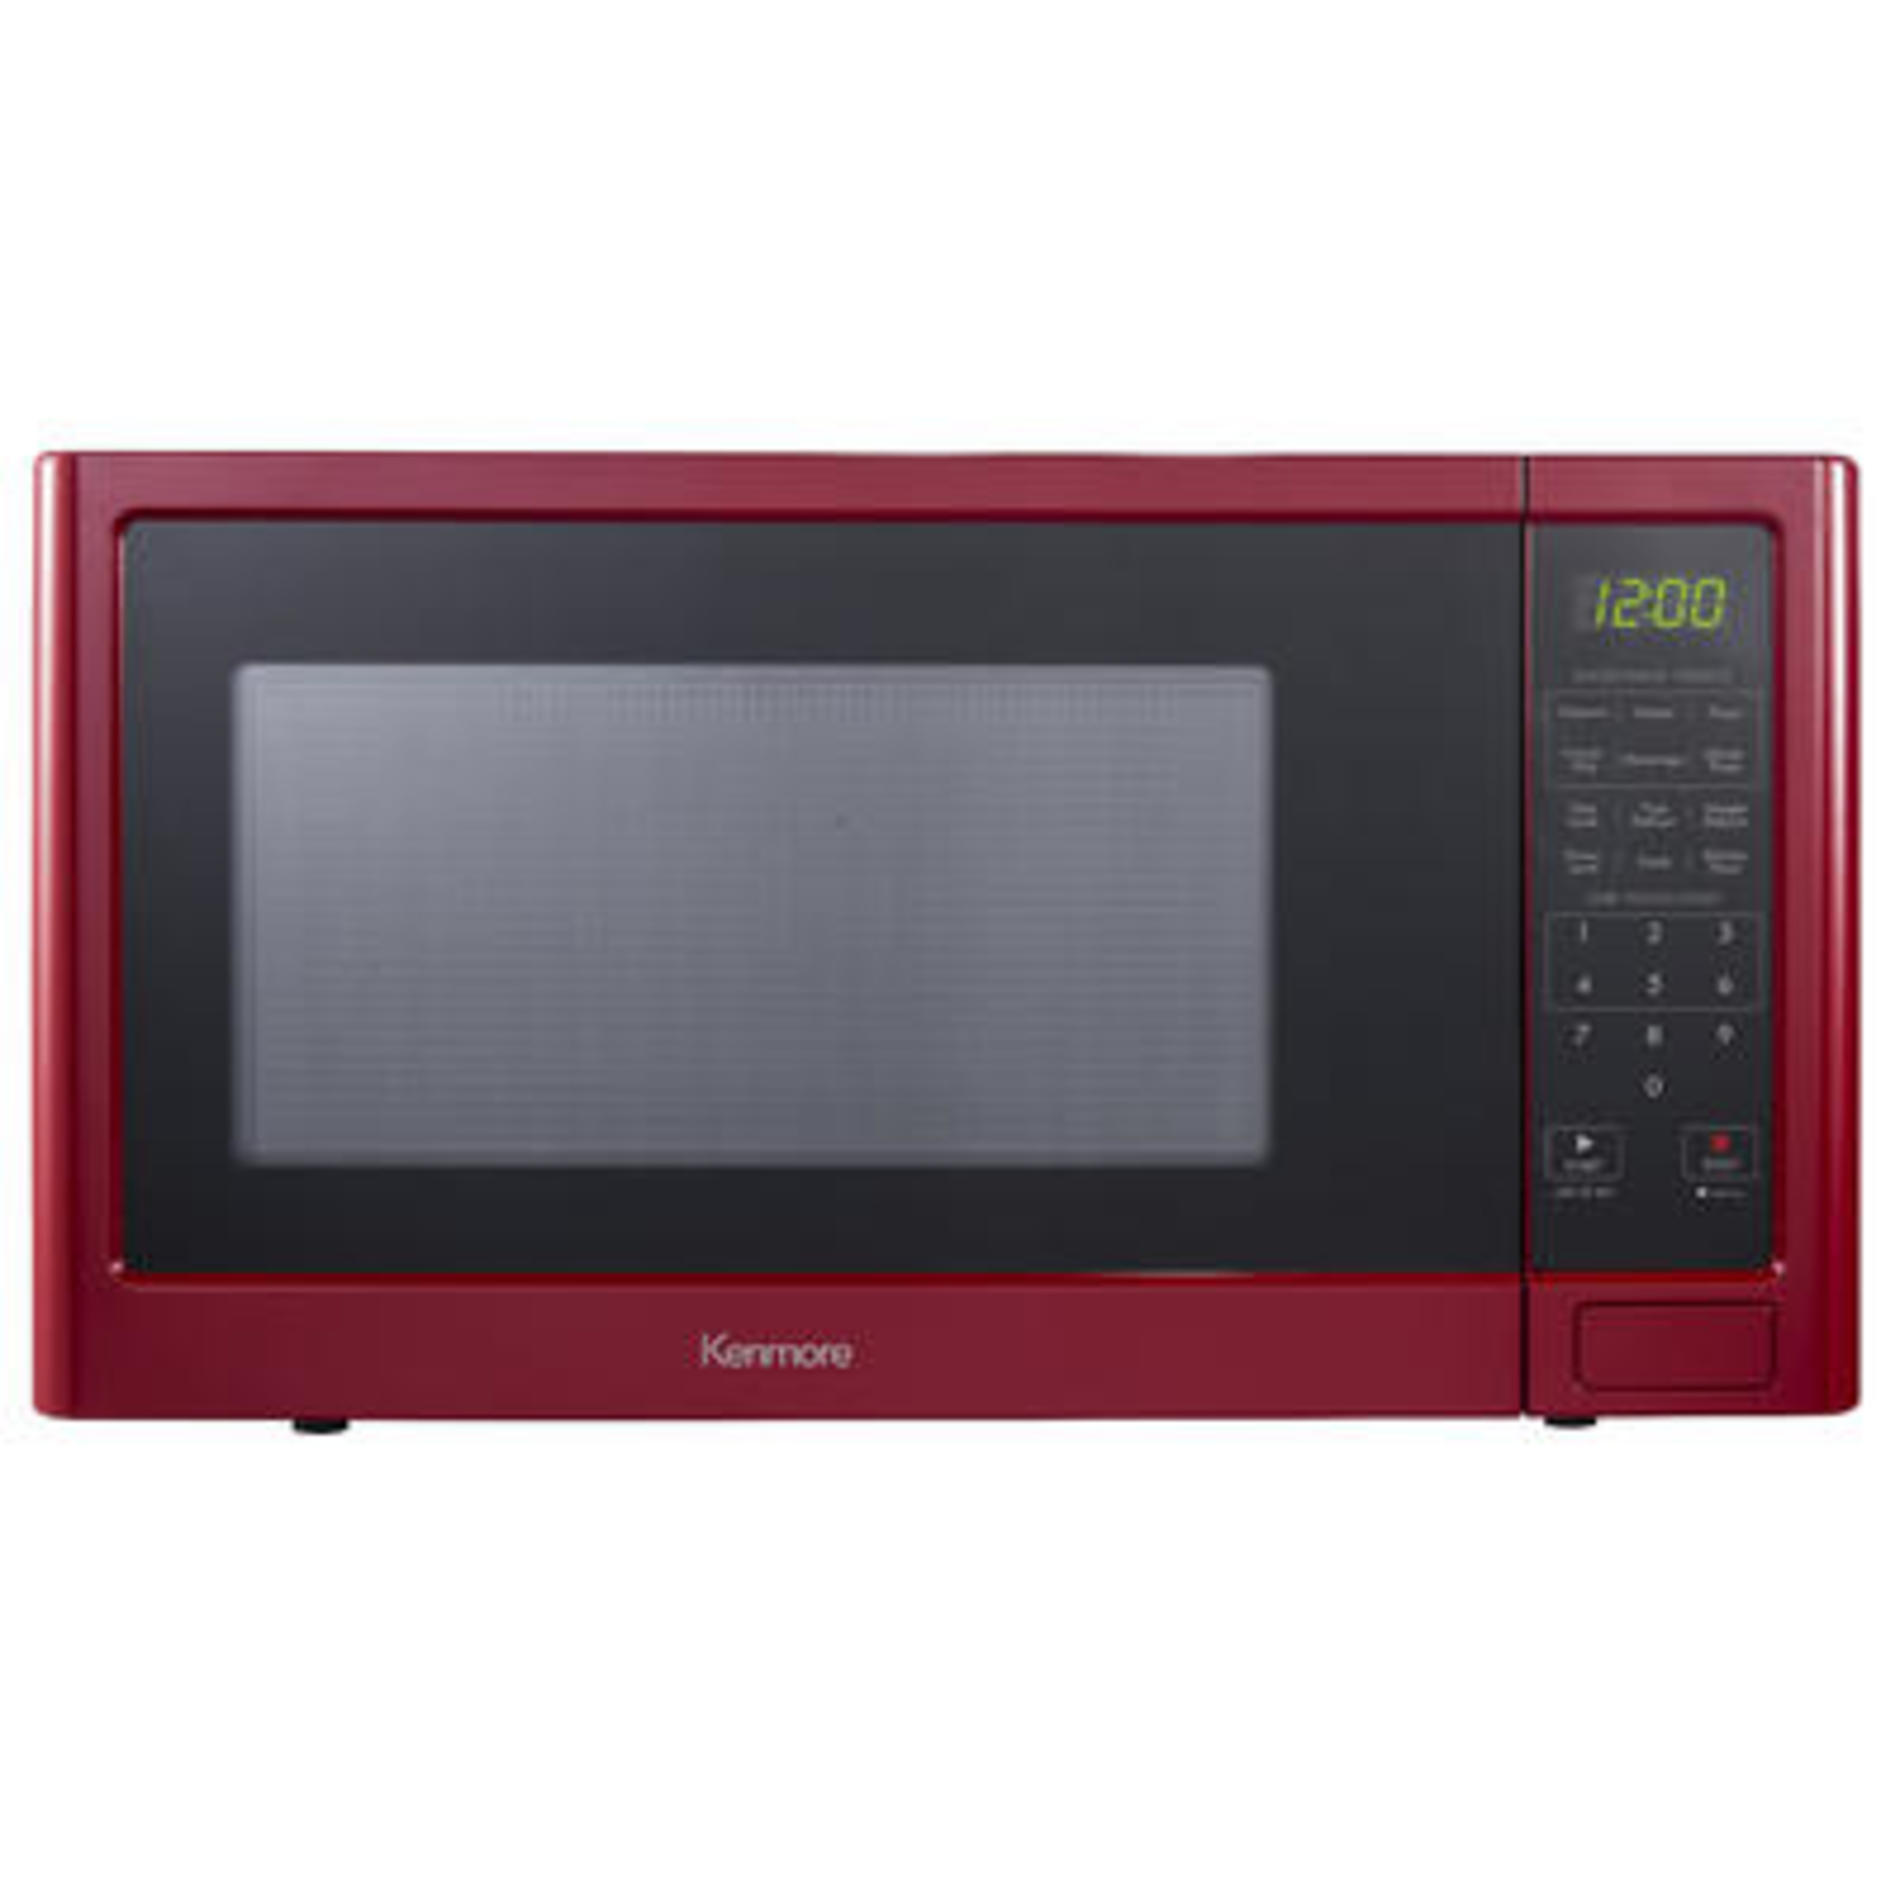 Kenmore P110N30AP-WJR 1.1 cu. ft. Microwave Oven - Red | Shop Your Way